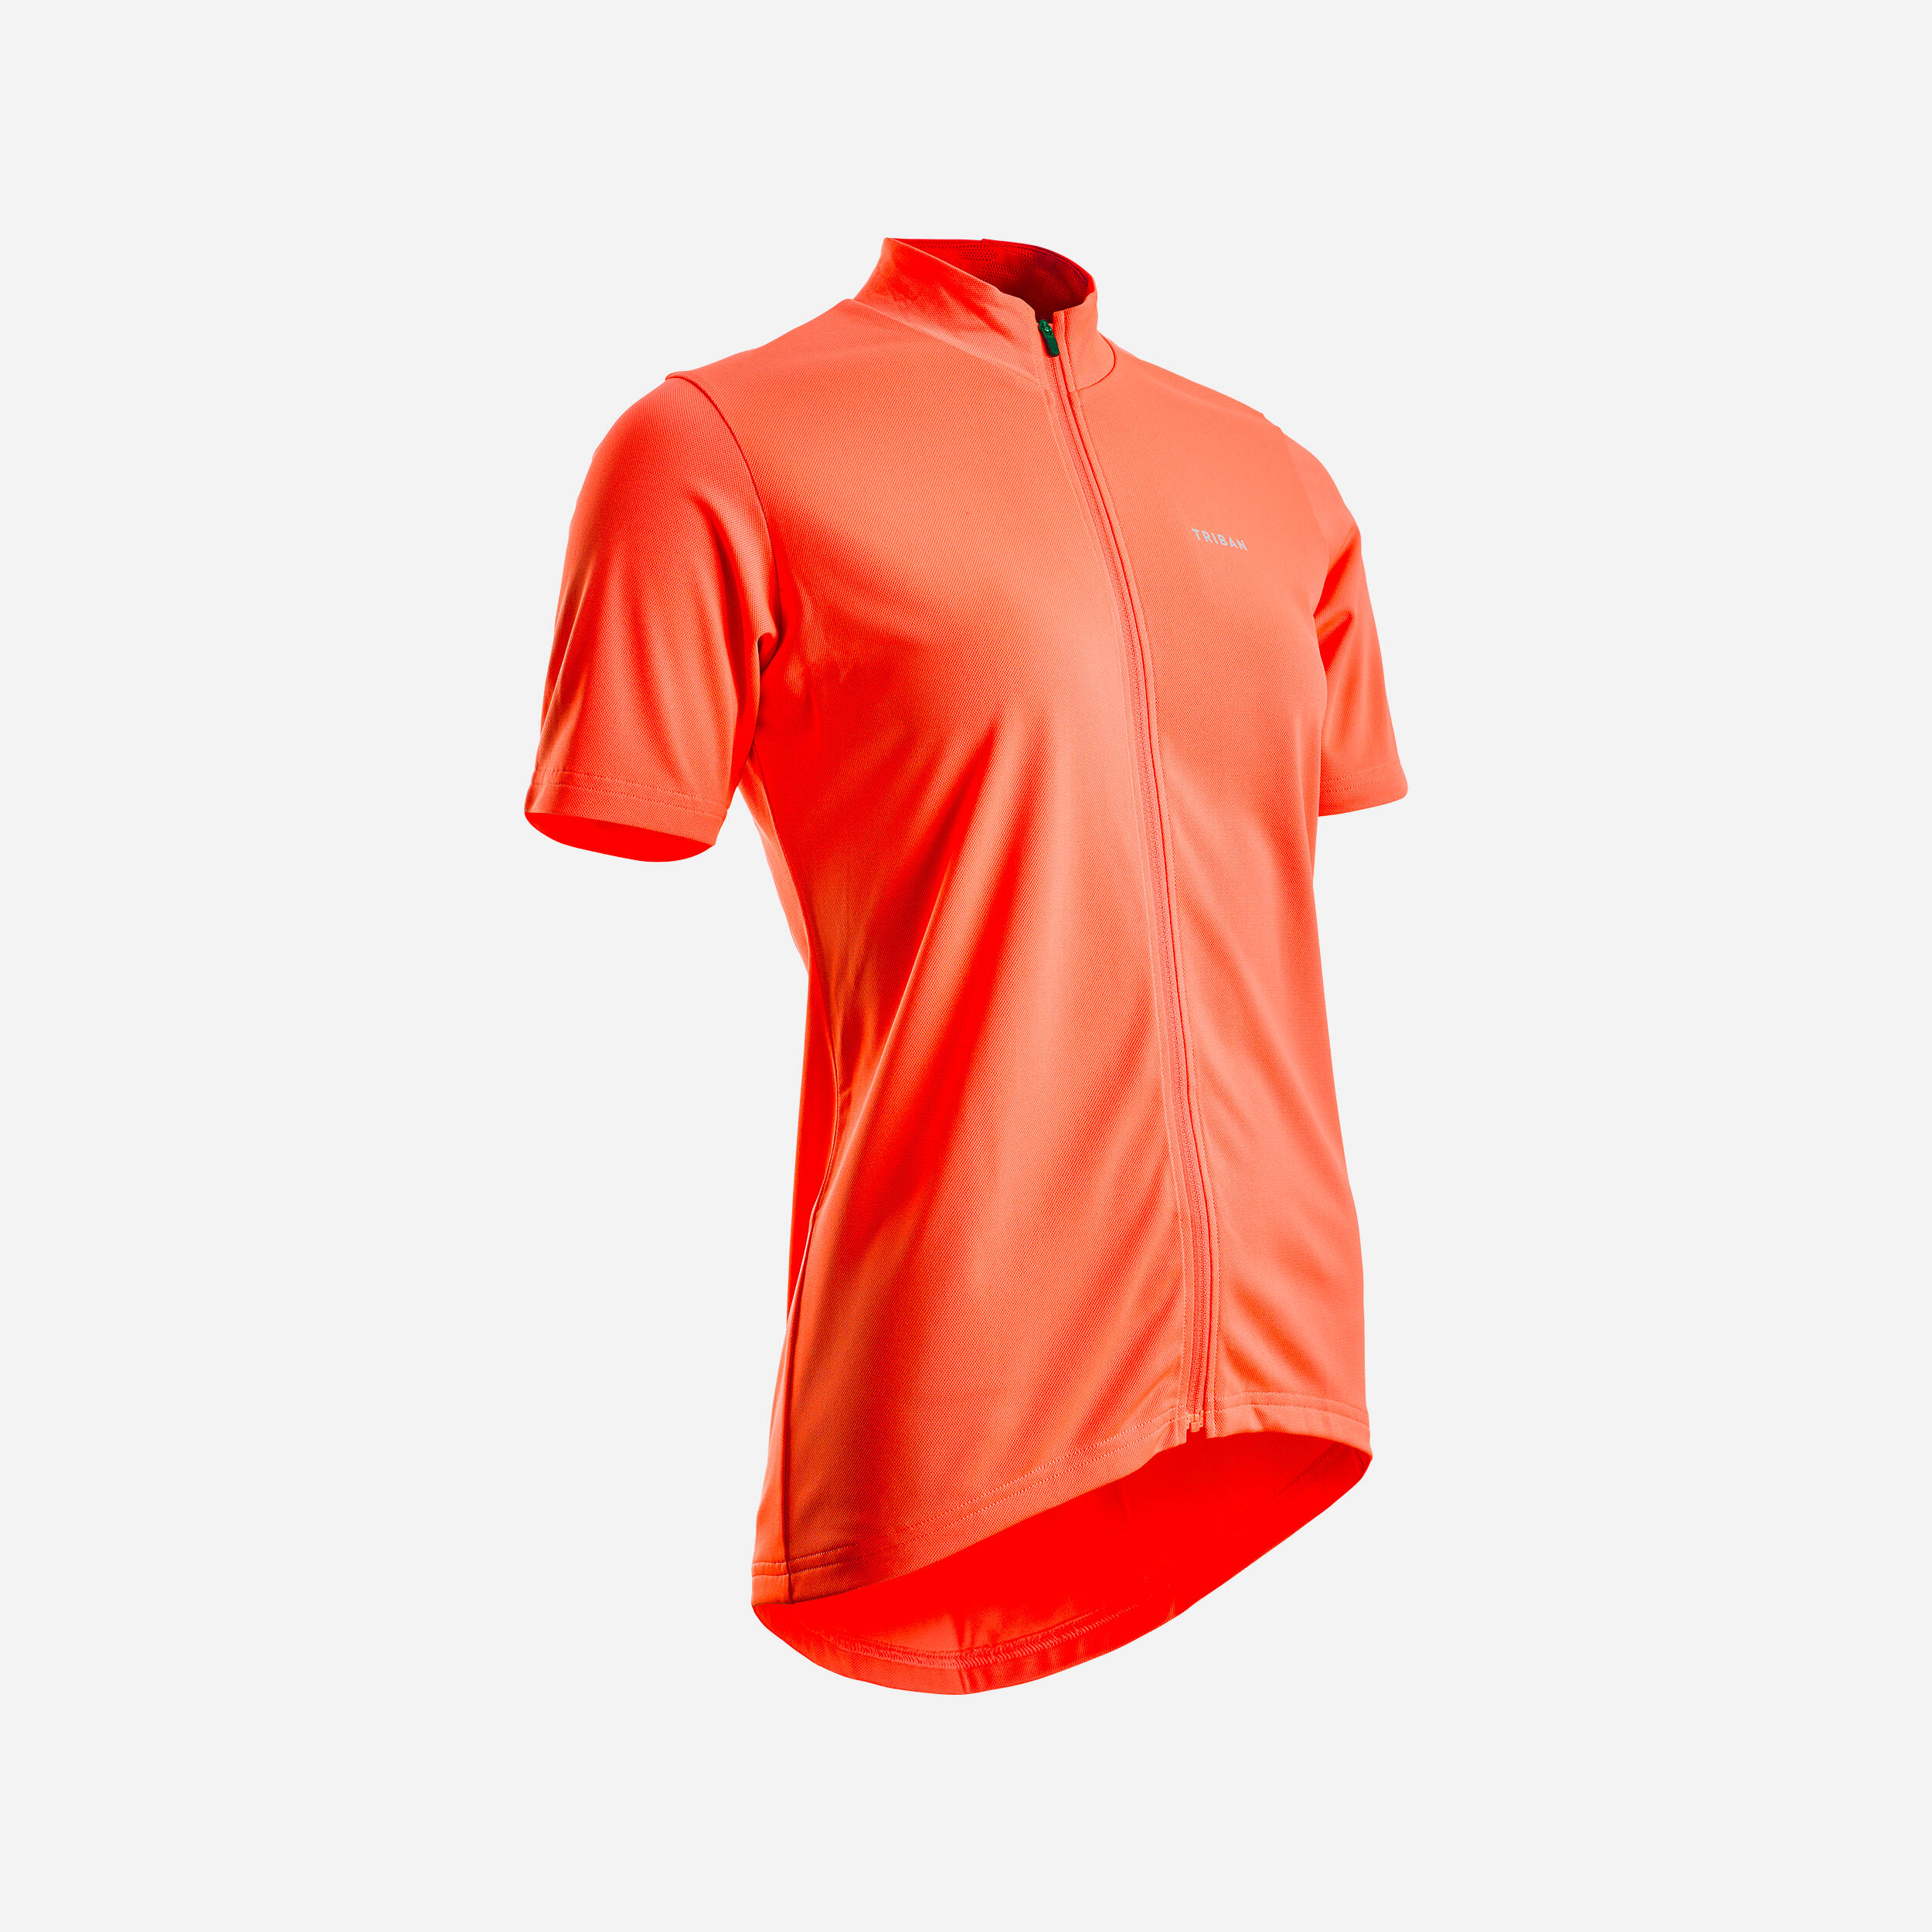 Women’s Cycling Short-Sleeved Jersey - 100 Coral - VAN RYSEL